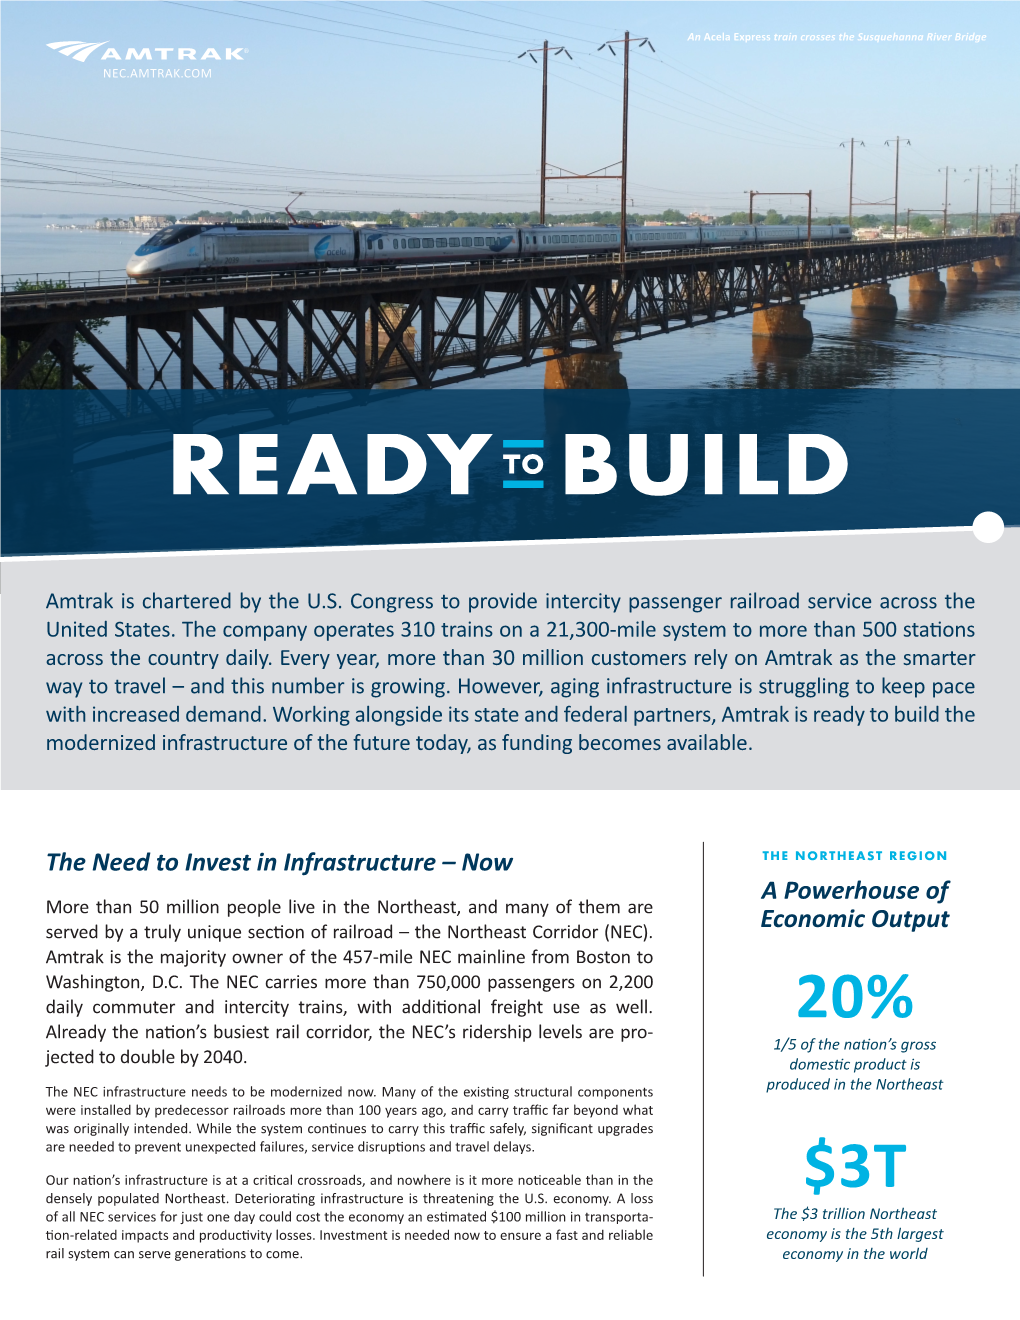 Download the Ready to Build Brochure